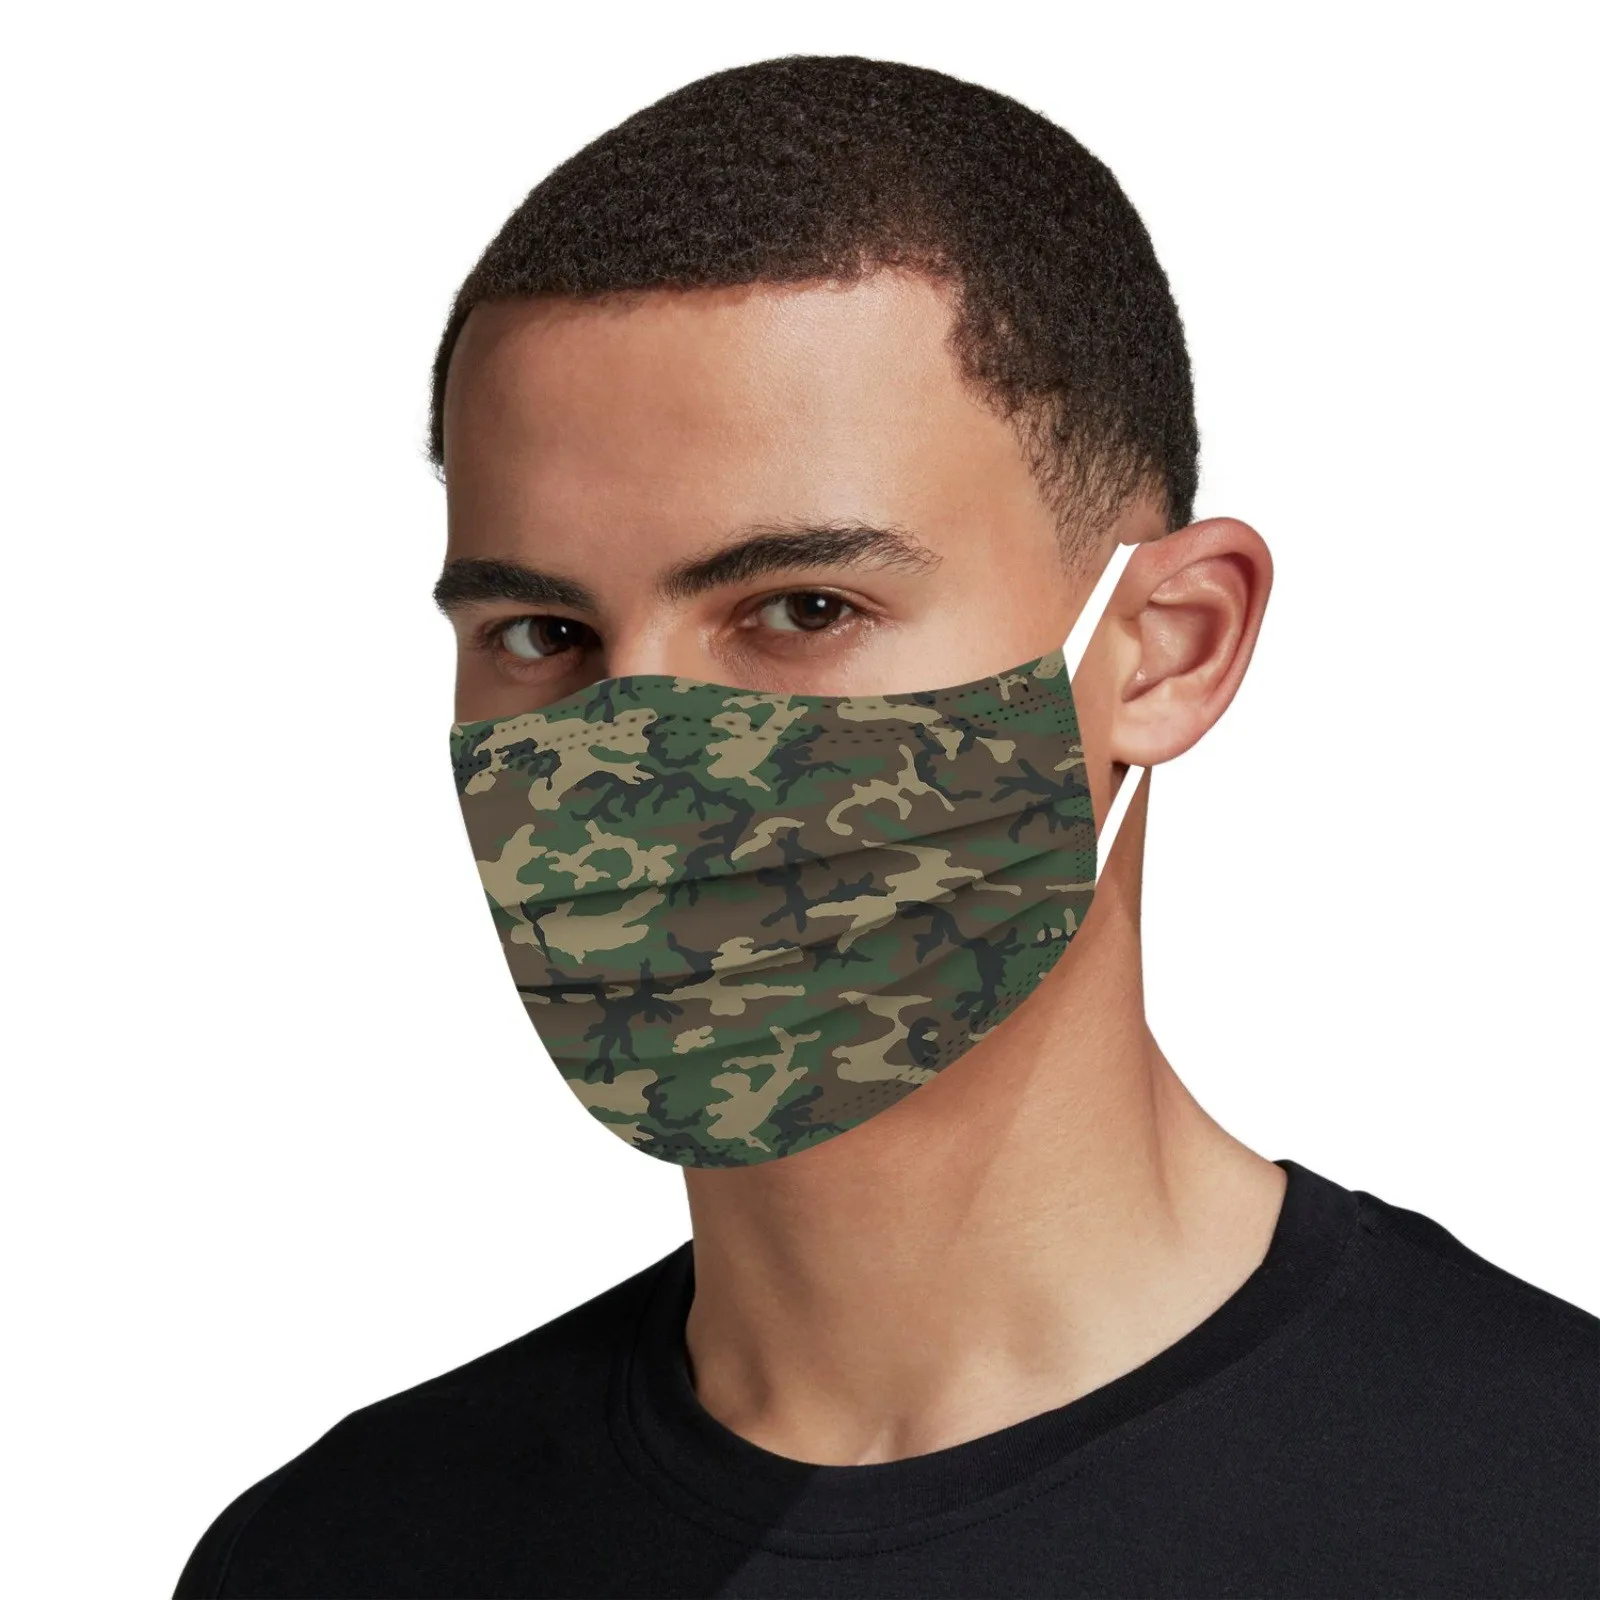 funny mens halloween costumes 50pcs Camouflage Disposable Mask Halloween Cosplay Fashion Printed 3-layer Designer Bandana Mascarillas For Face Cosplay Masque scary halloween costumes